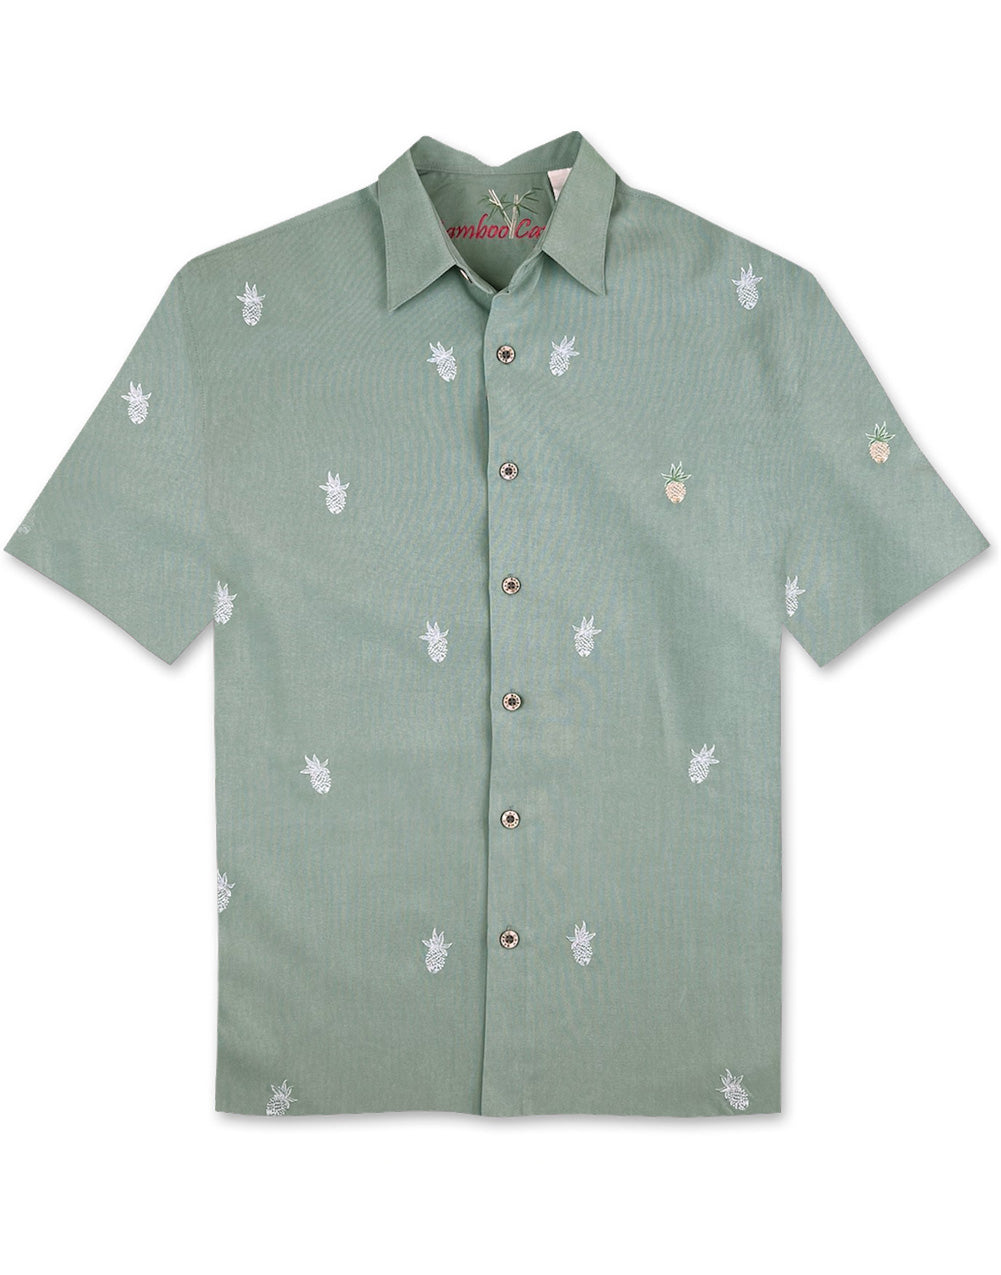 Pineapple Collection Embroidered Camp Shirt by Bamboo Cay